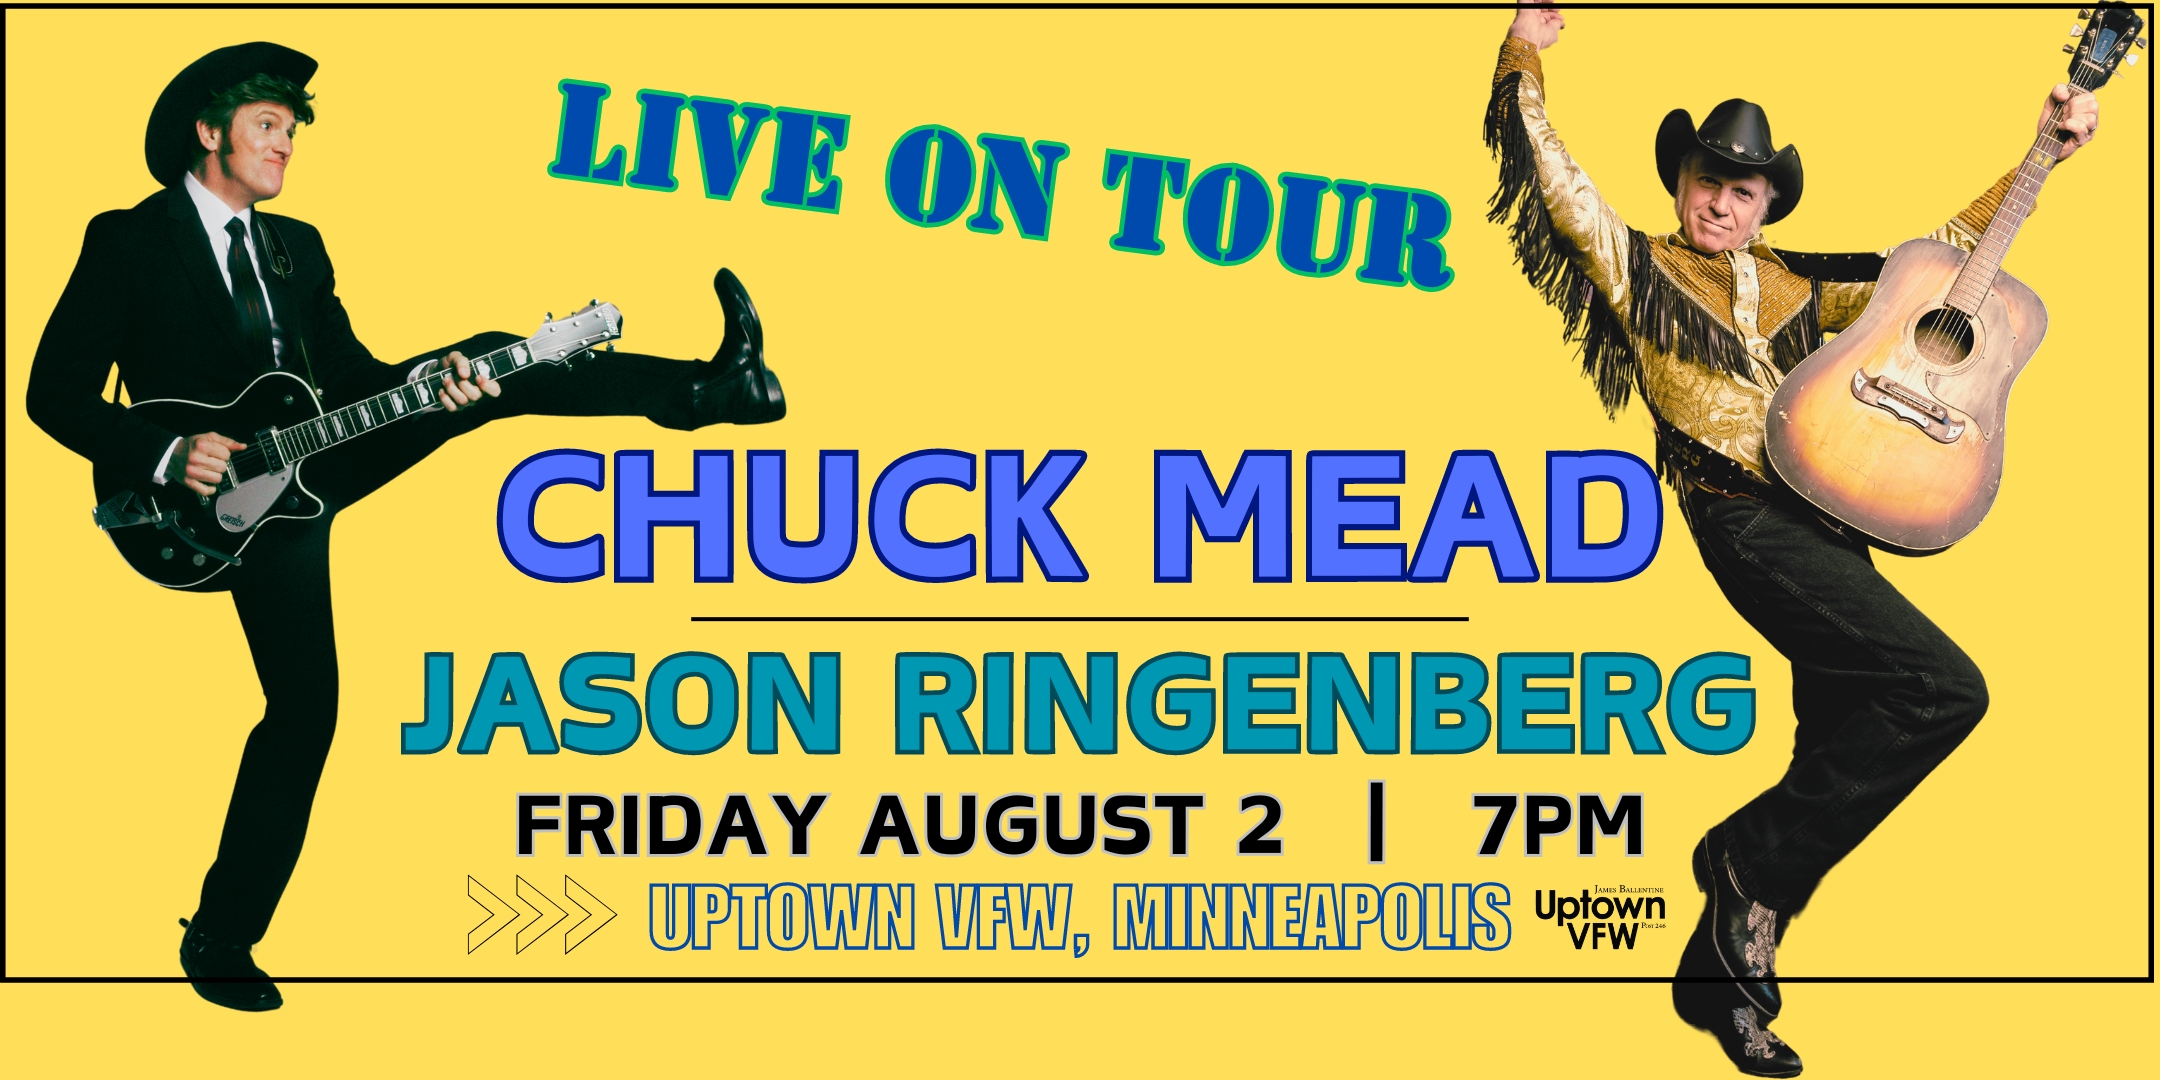 Chuck Mead Jason Ringenberg Friday, August 2 James Ballentine "Uptown" VFW Post 246 Doors 6:30pm :: Music 7:00pm :: 21+ $30 ADV / $35 DOS TICKETS ON SALE NOW